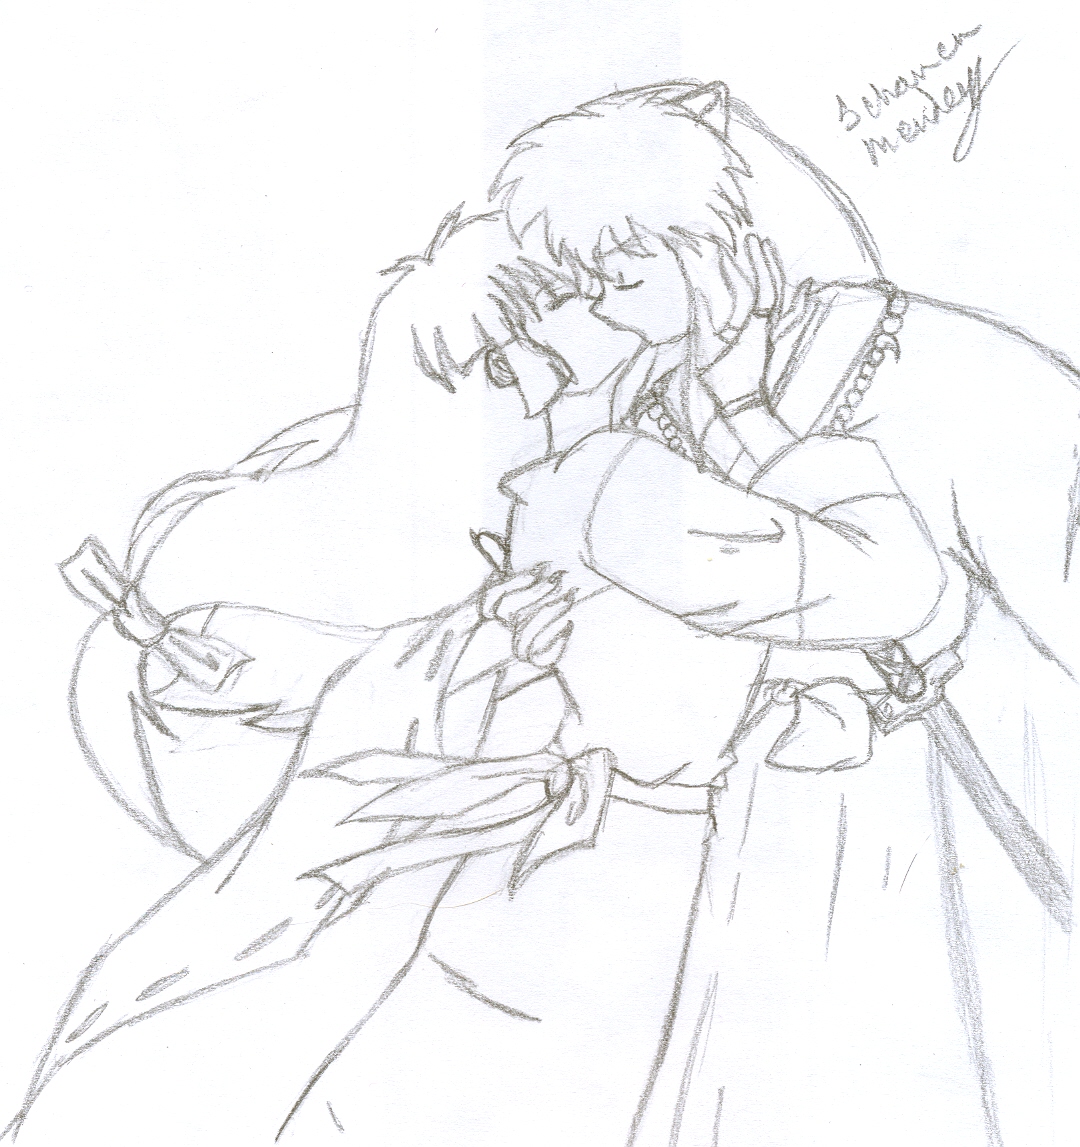 Request - linkxmidna100 - Inuyasha and Sango Kiss by 1513